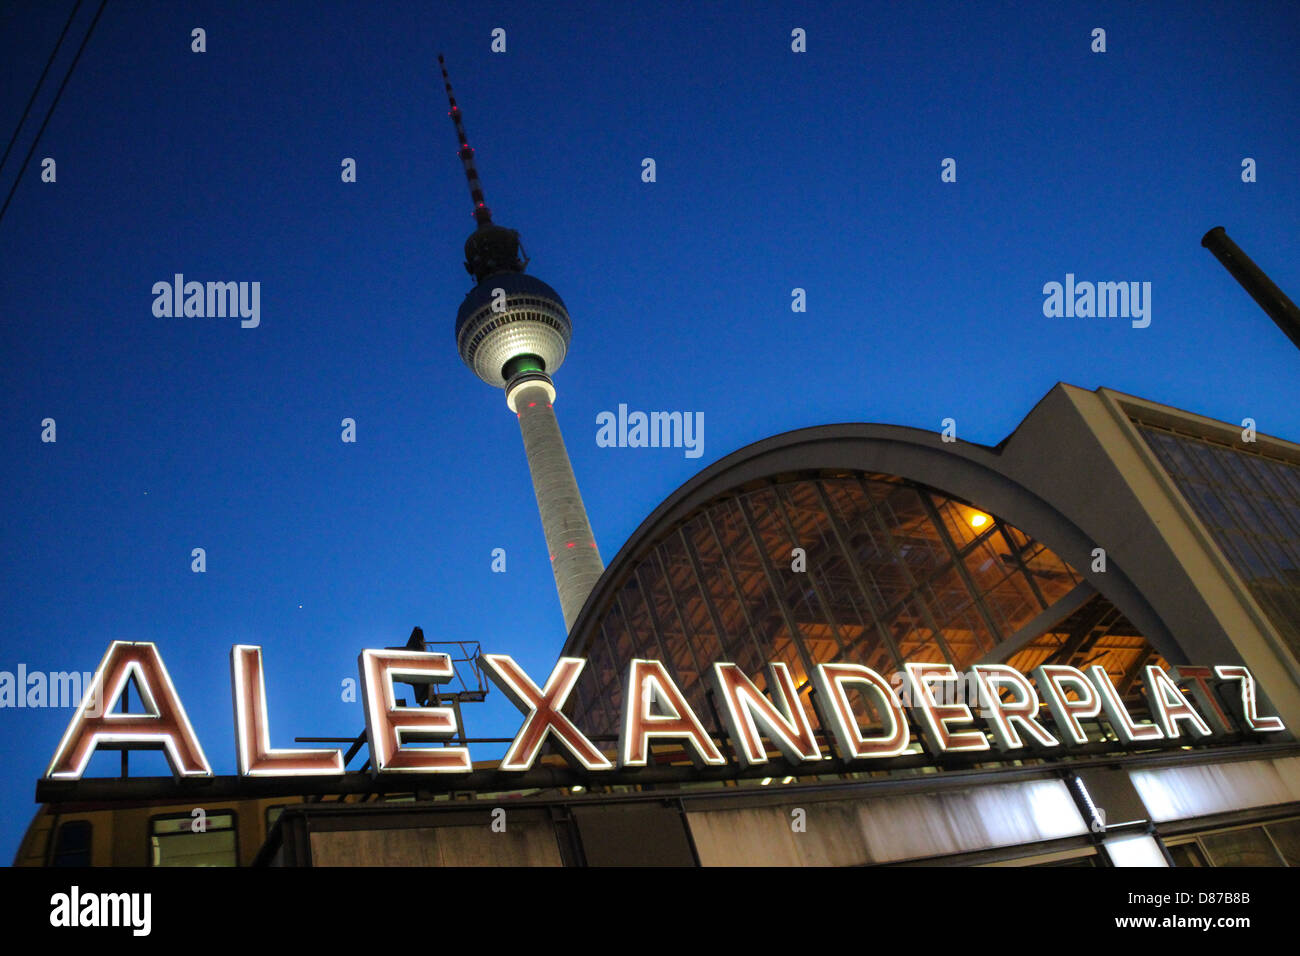 TV tower in Berlin 'Berliner Fernsehturm' view from Alexanderplatz Square, overlooking the illuminated text Stock Photo